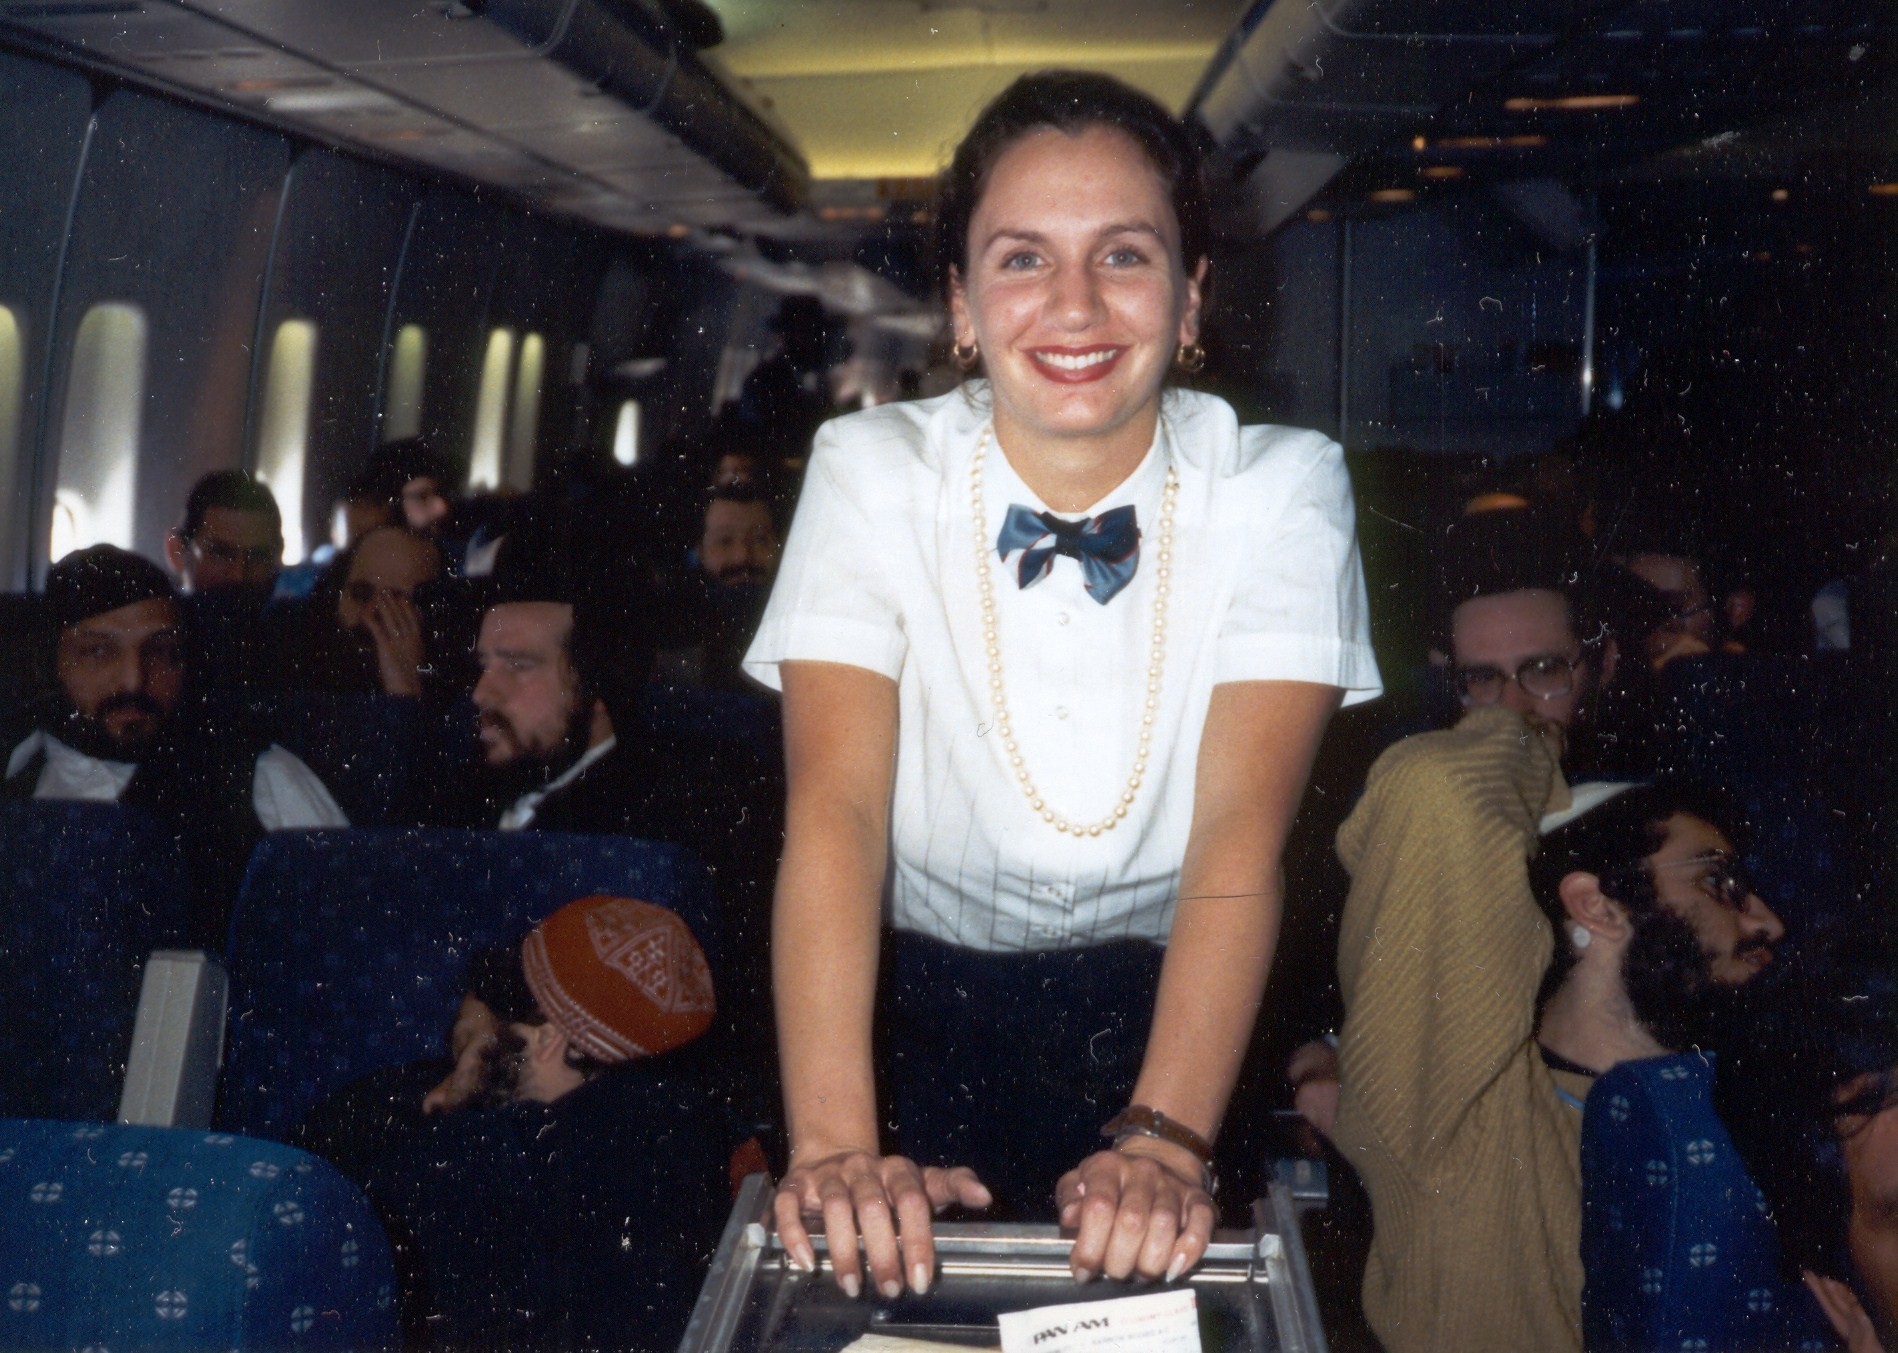 1991 September  Flight 31 Moscow - New York JFK Jane Andreassi serving customers in the Economy Cabin of a Pan Am 747.